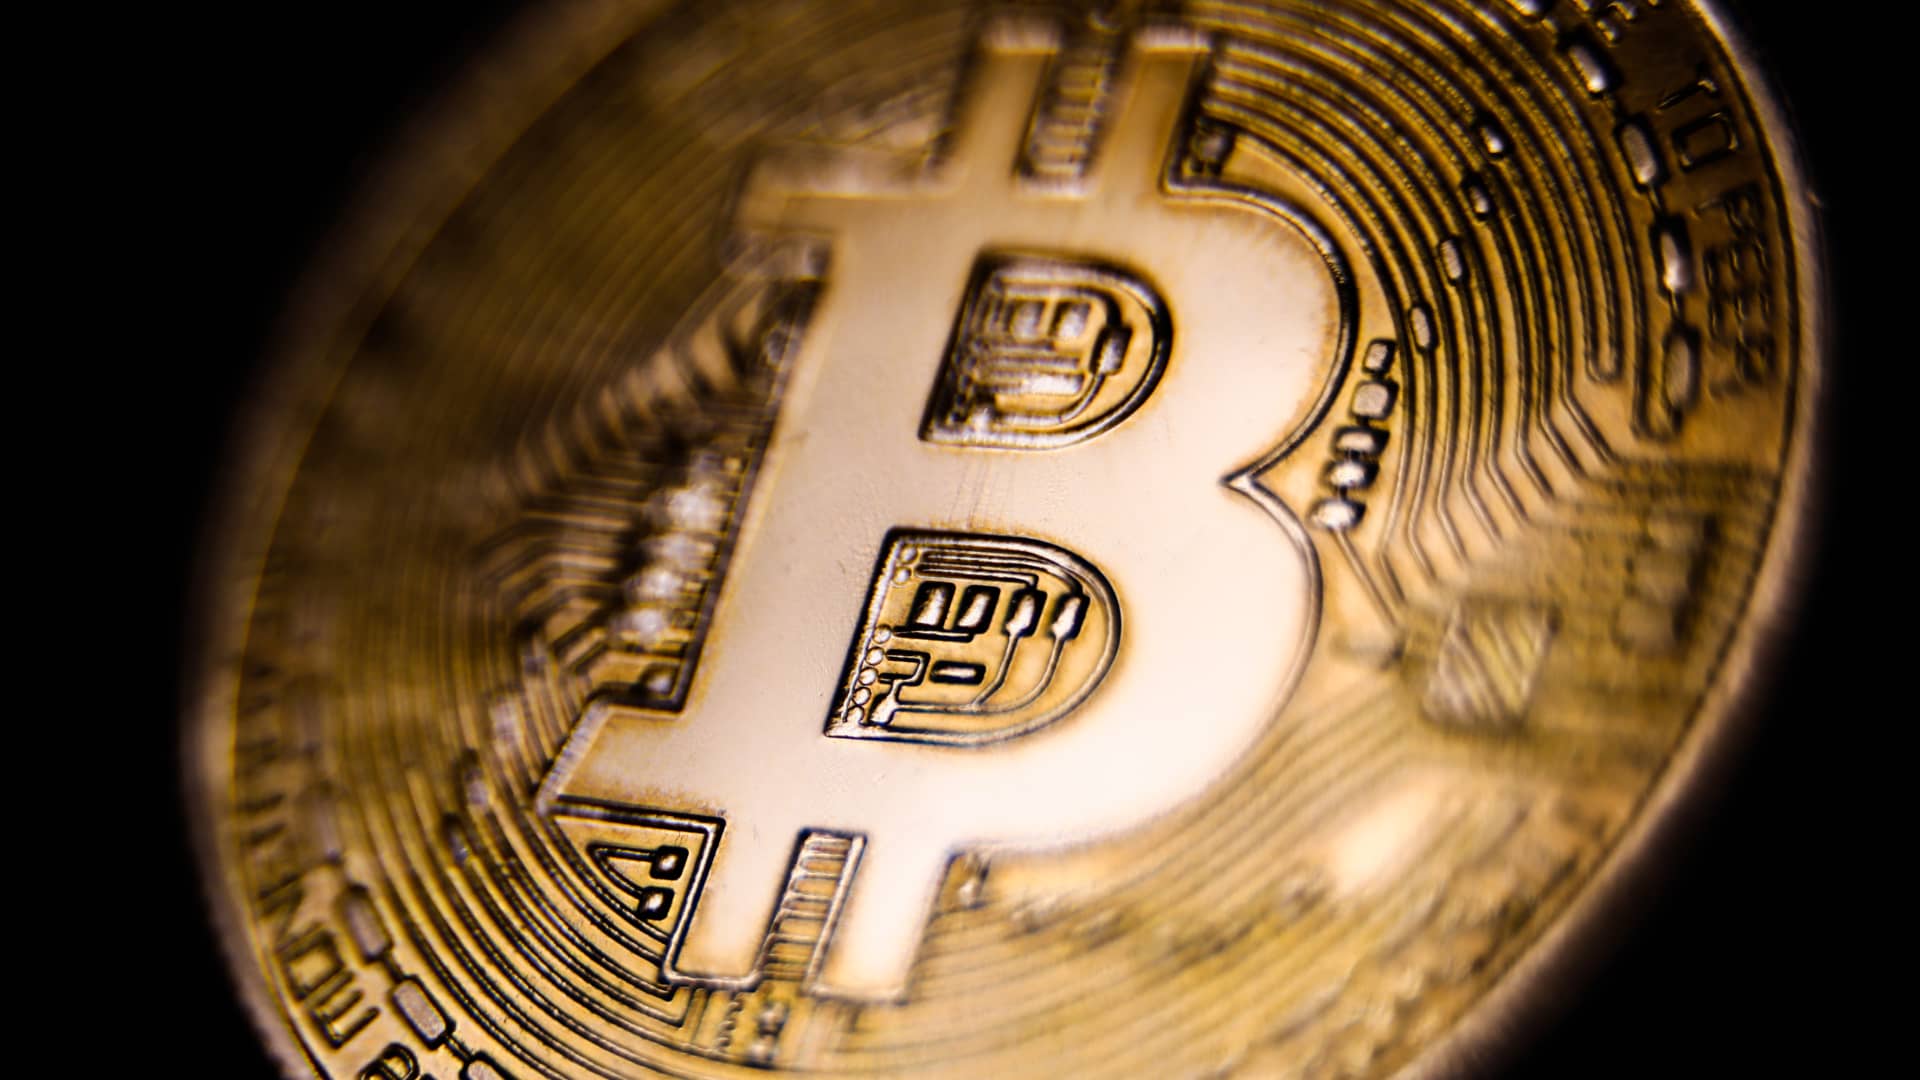 Bitcoin jumps as much as 10% with crypto market topping $1 trillion as U.S. creates backstop for SVB depositors